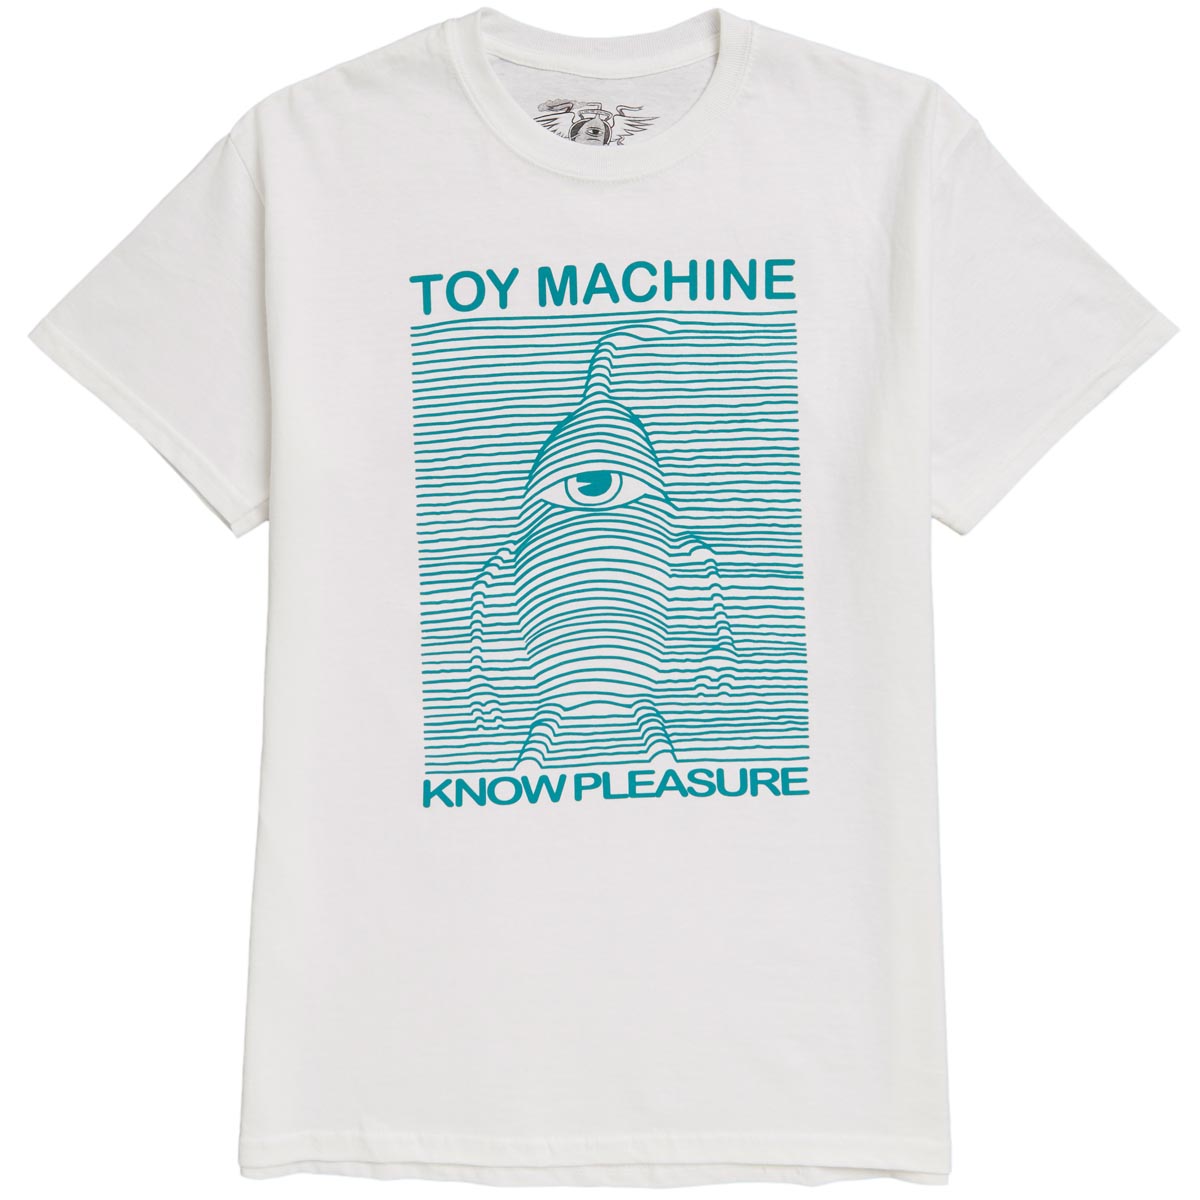 Toy Machine Toy Division T-Shirt - White image 1